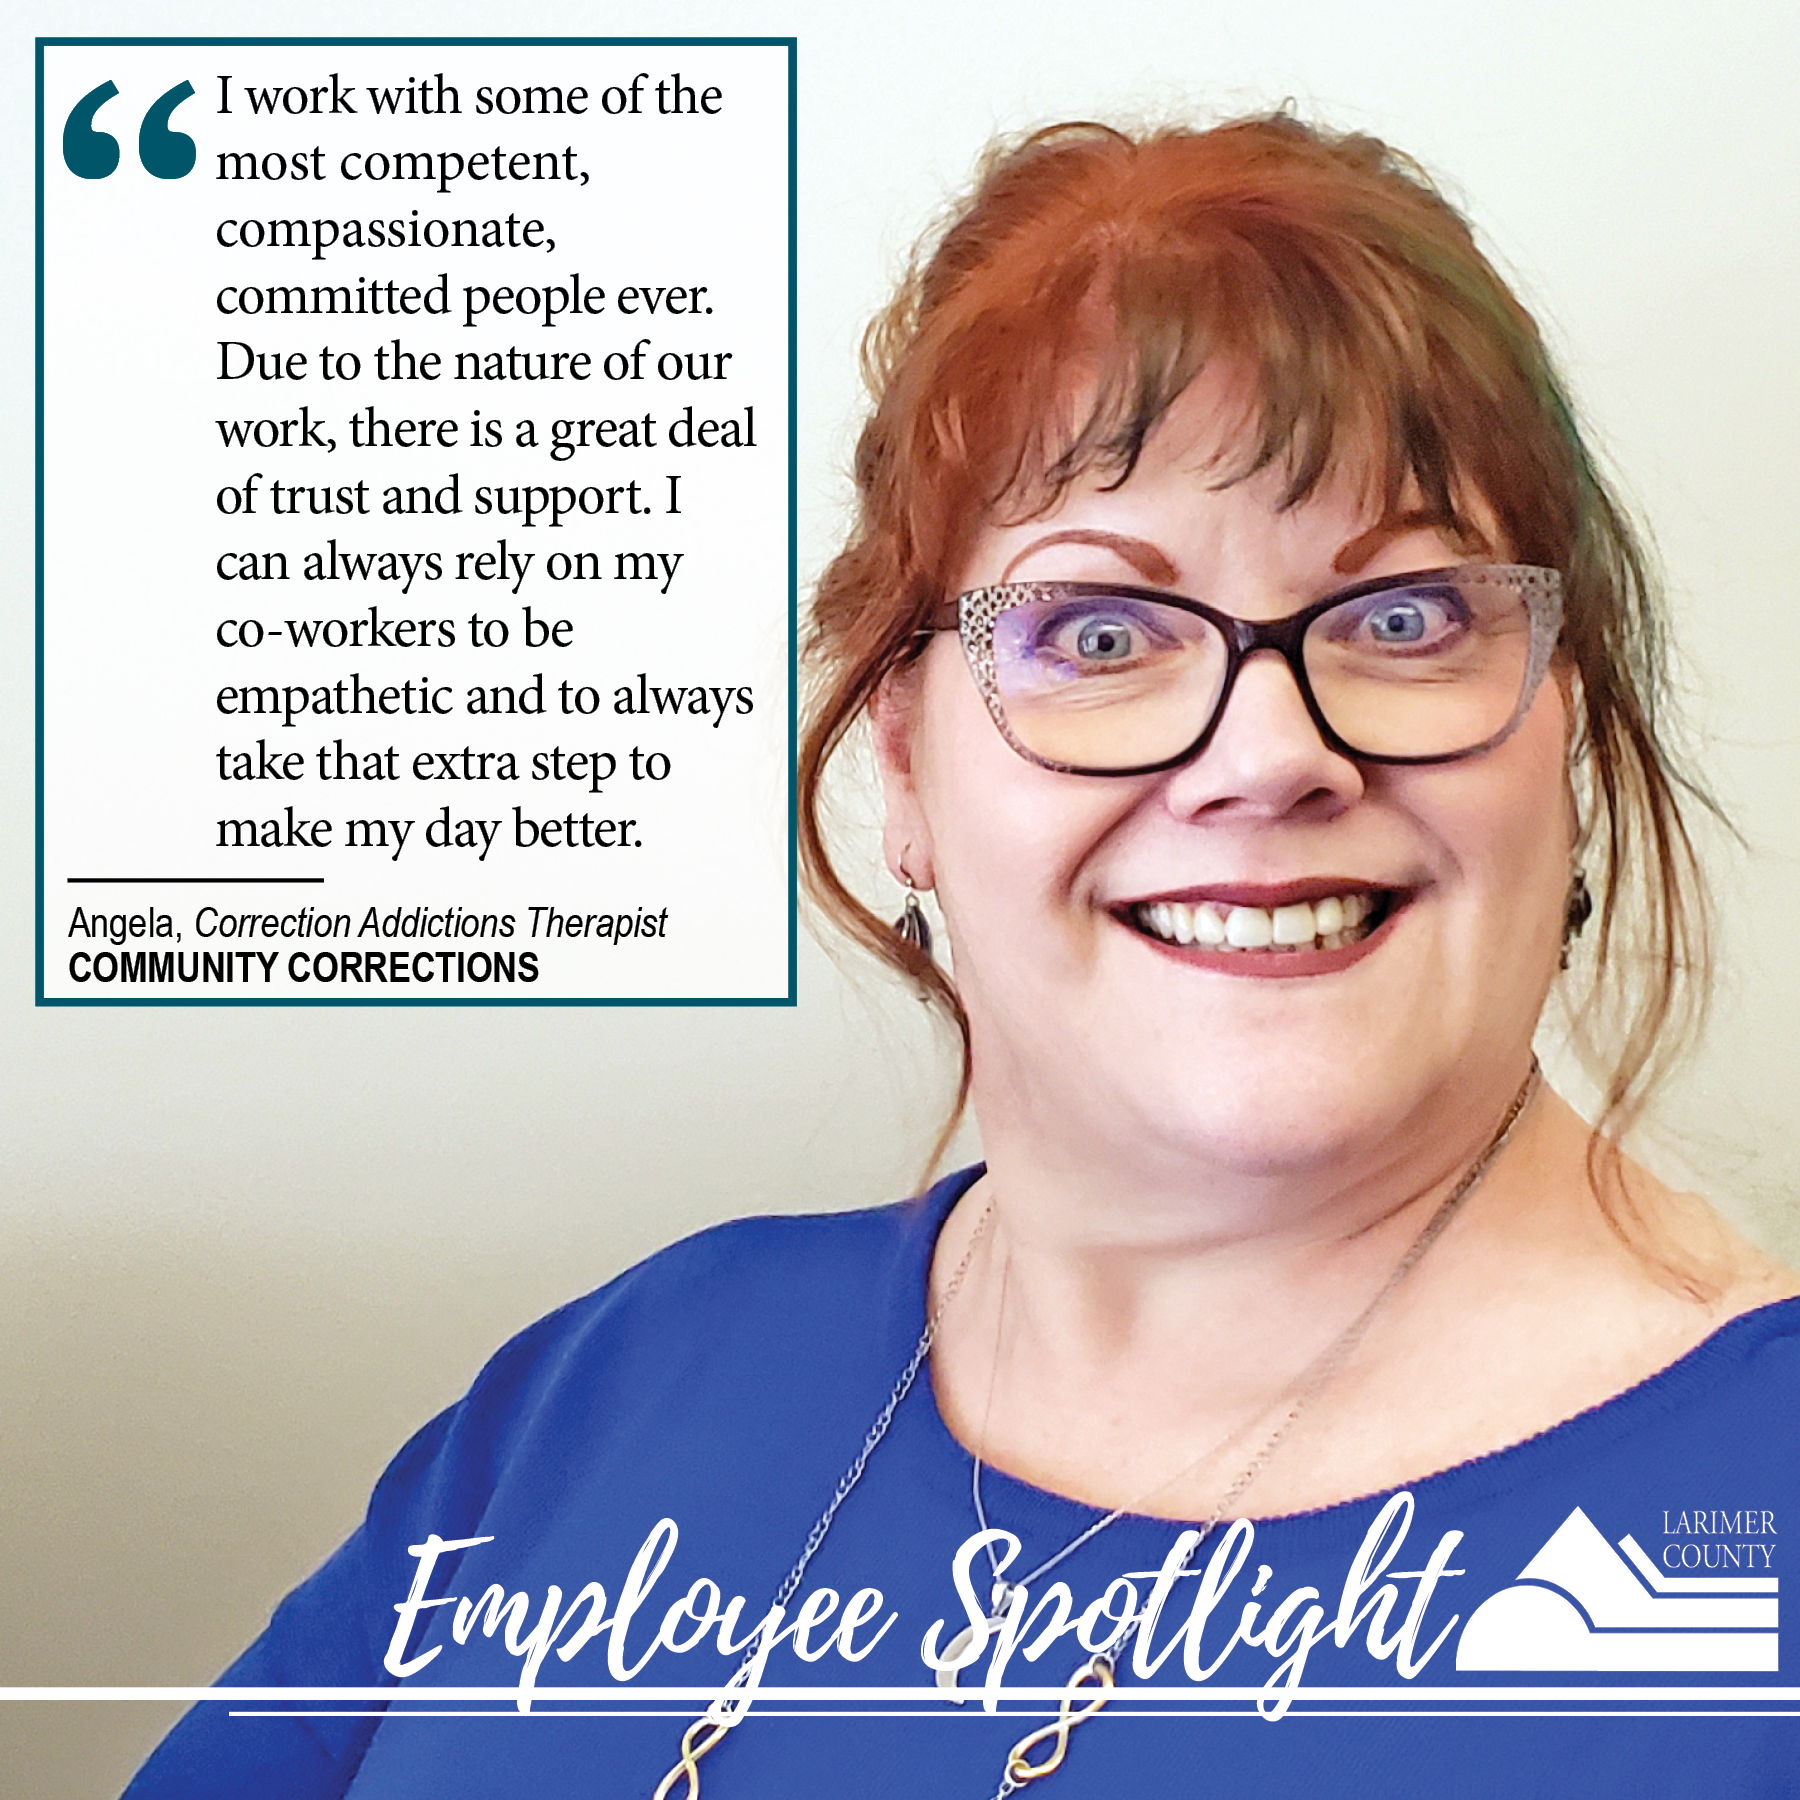 Image 2: "I work with some of the  most competent, compassionate, committed people ever. Due to the nature of our work, there is a great deal of trust and support. I can always rely on my co-workers to always take that extra step to make my day better."